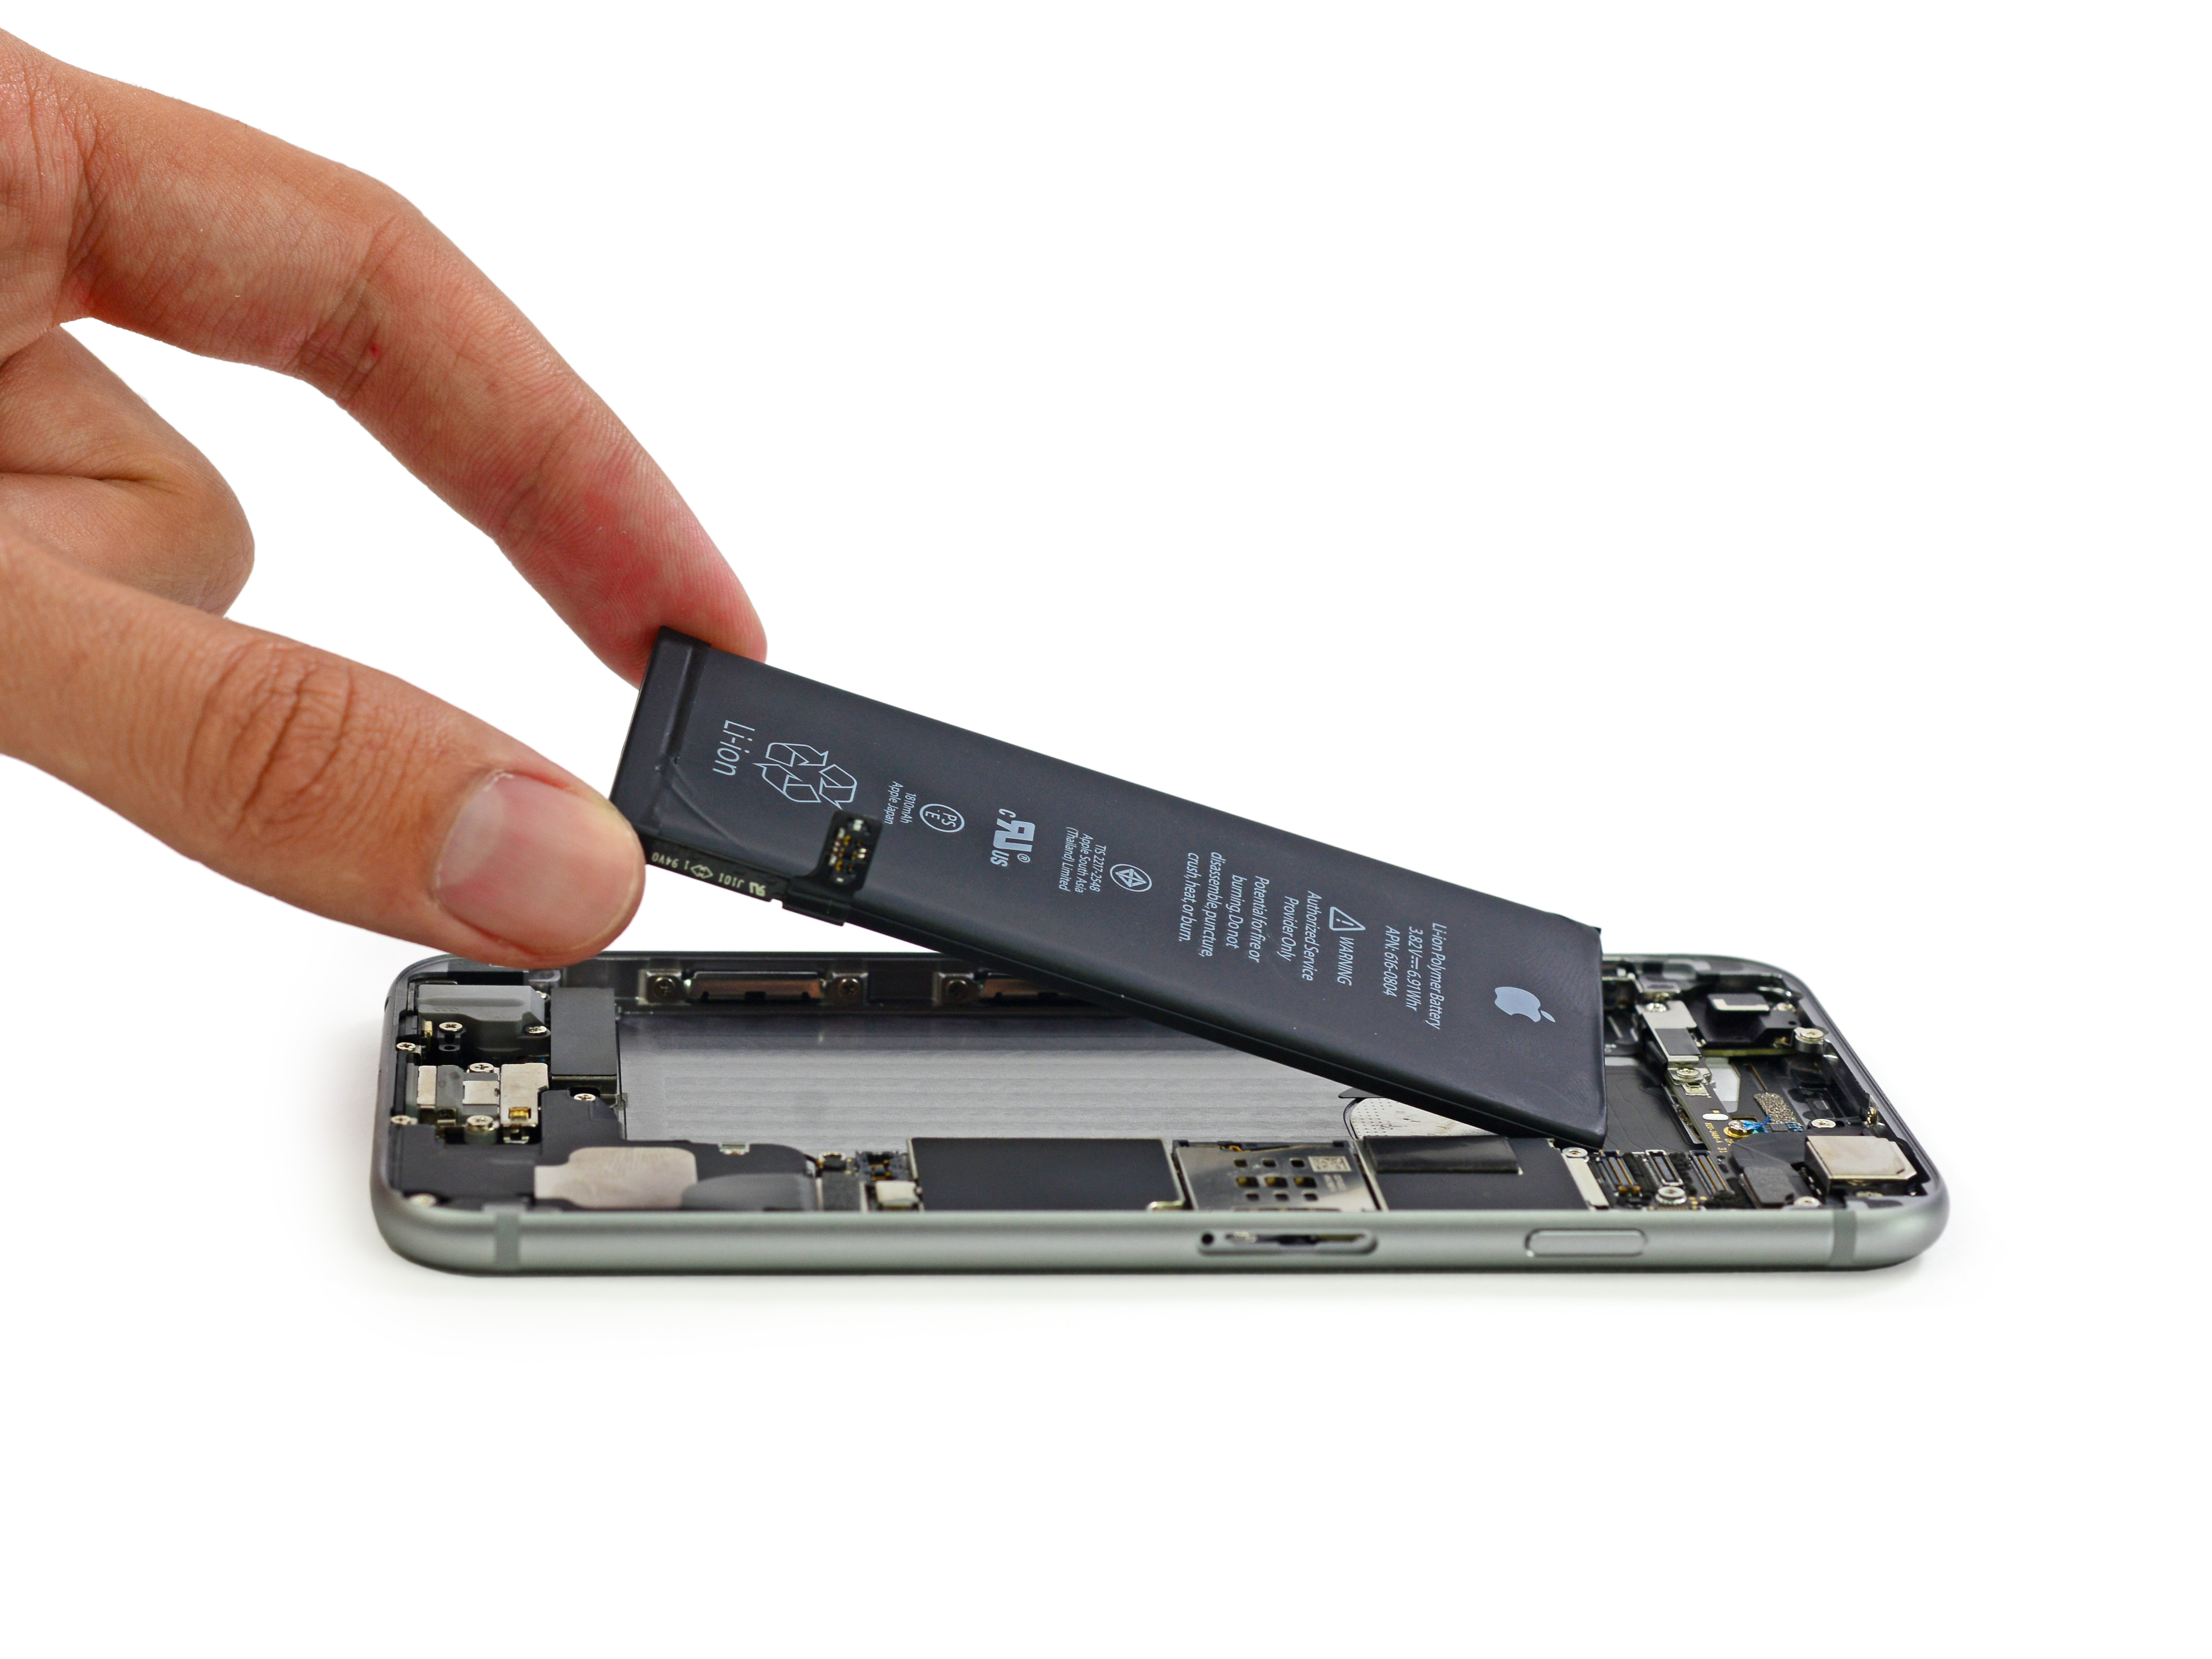 Replacement battery. Iphone 6s Battery. Iphone 6 Battery. Iphone 6 батарейка. Батарея на айфон 6s.